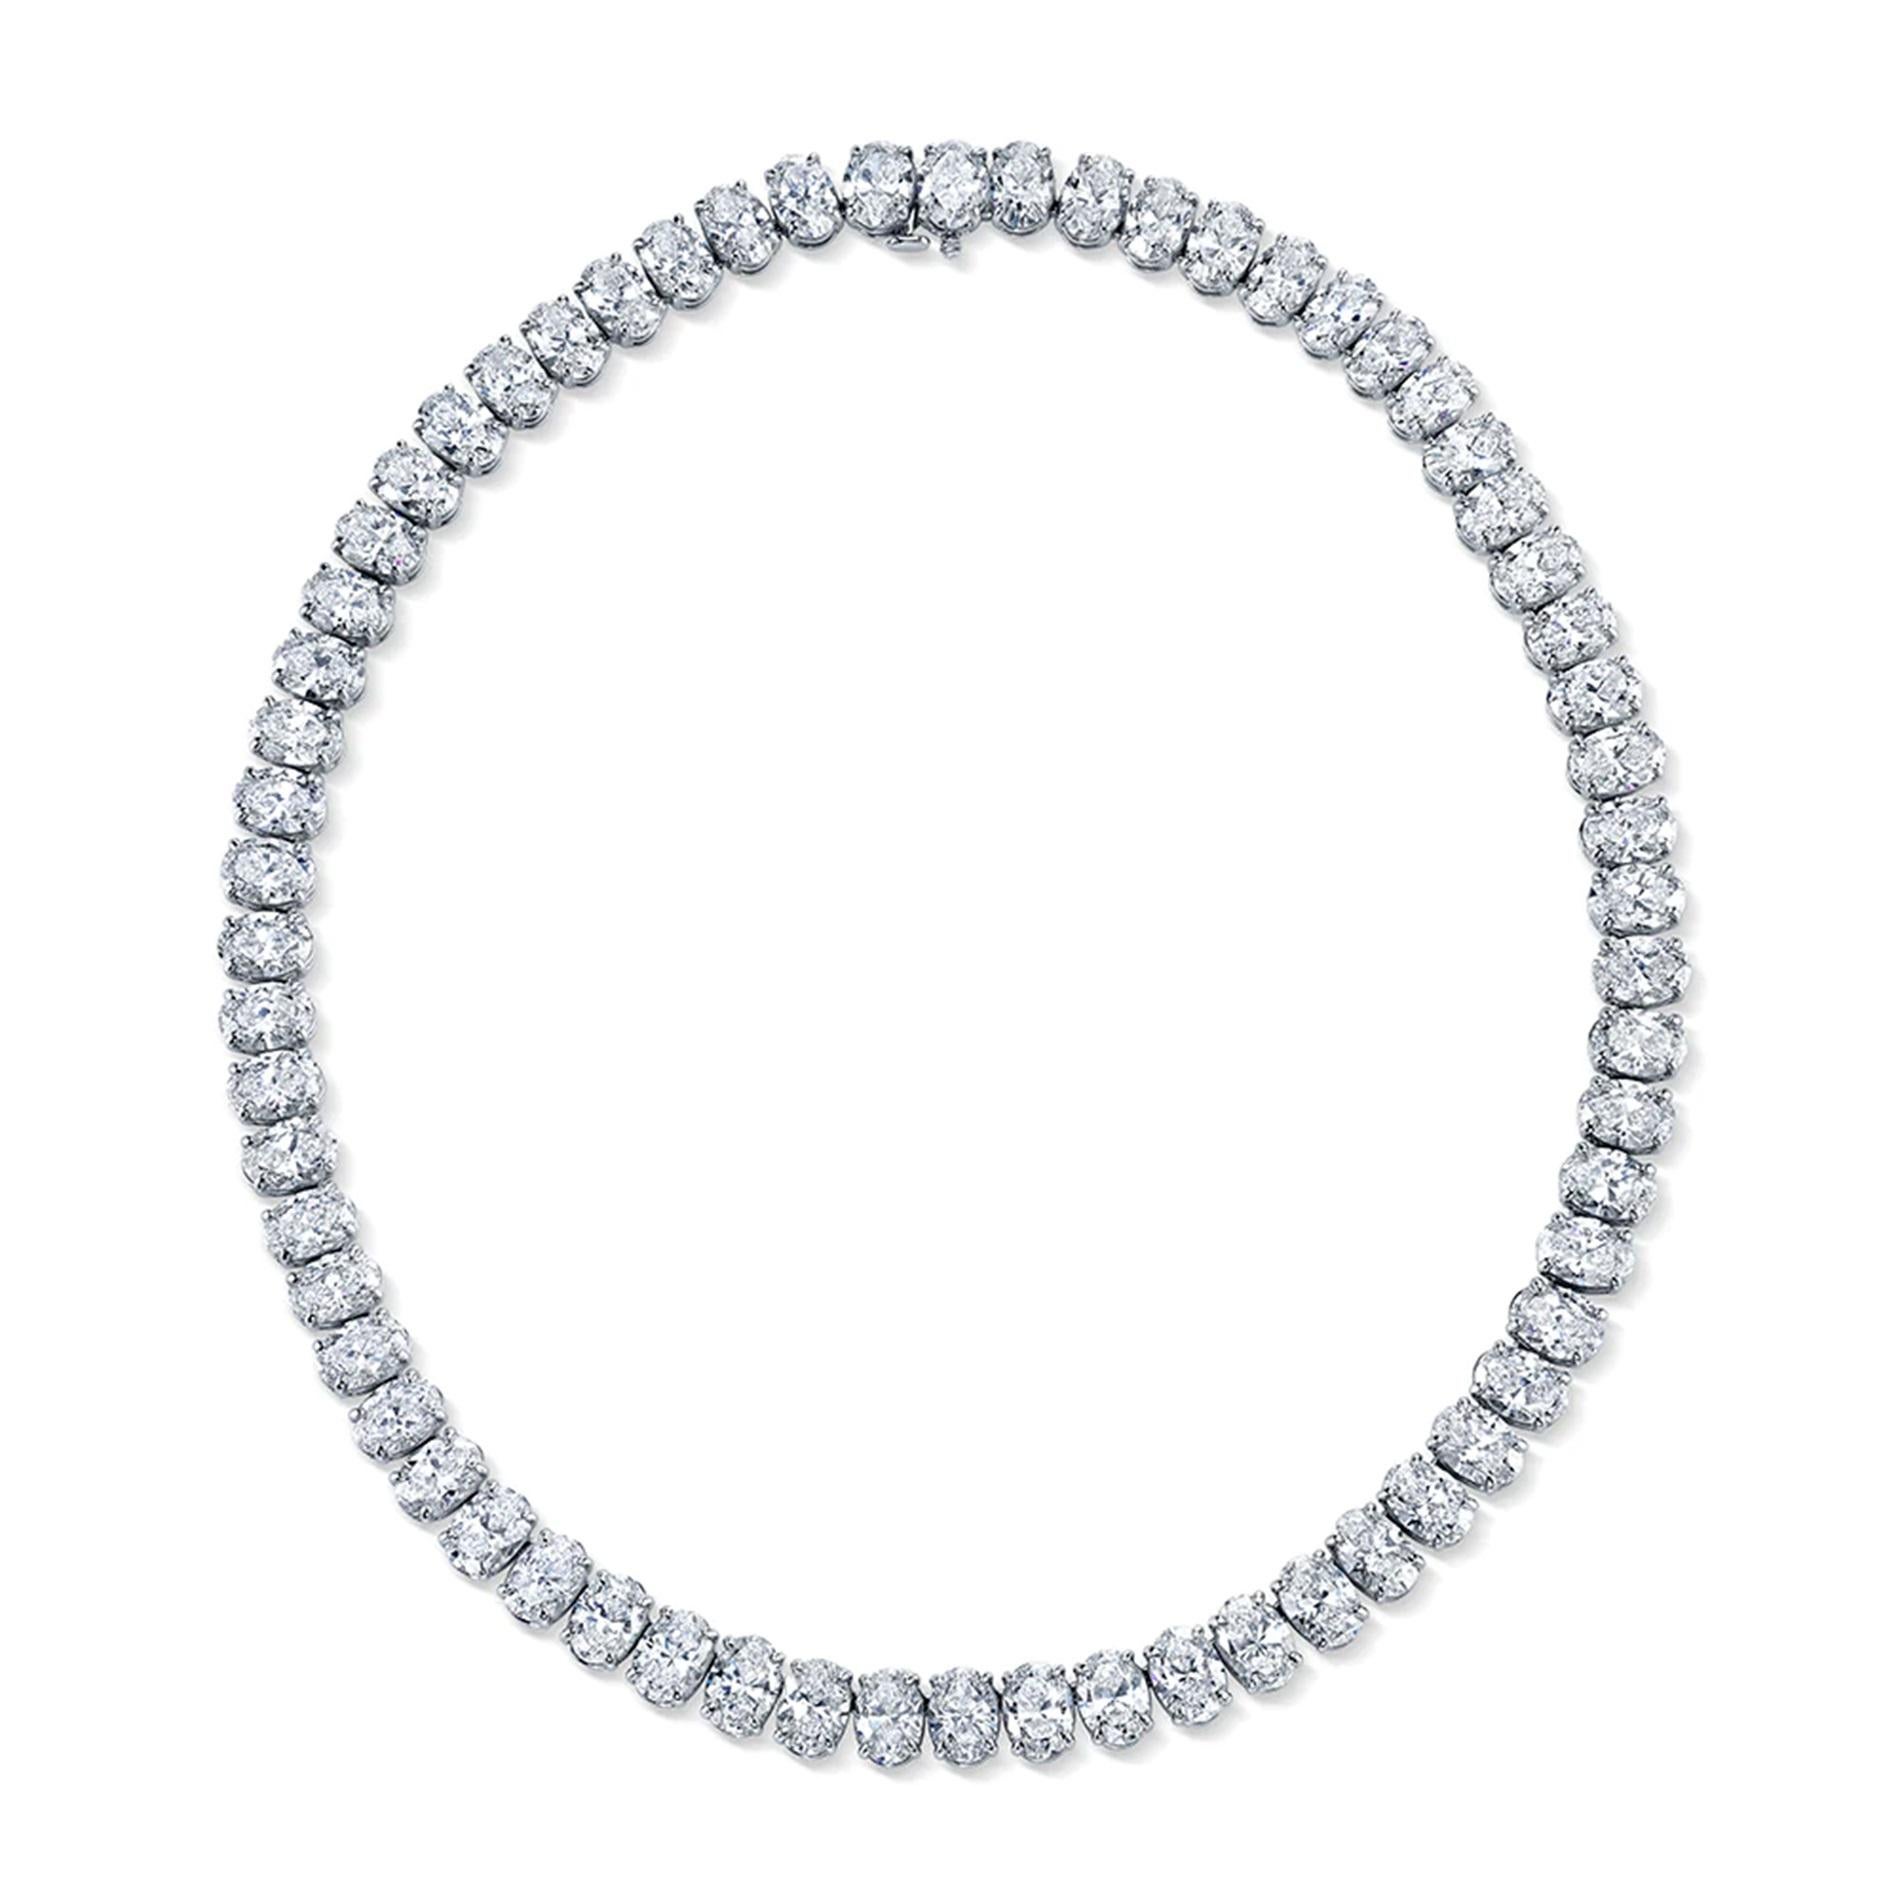 An exquisite 65 carat oval diamond tennis necklace set in solid 18 carats white gold
f color
vs1/vs2 clarity